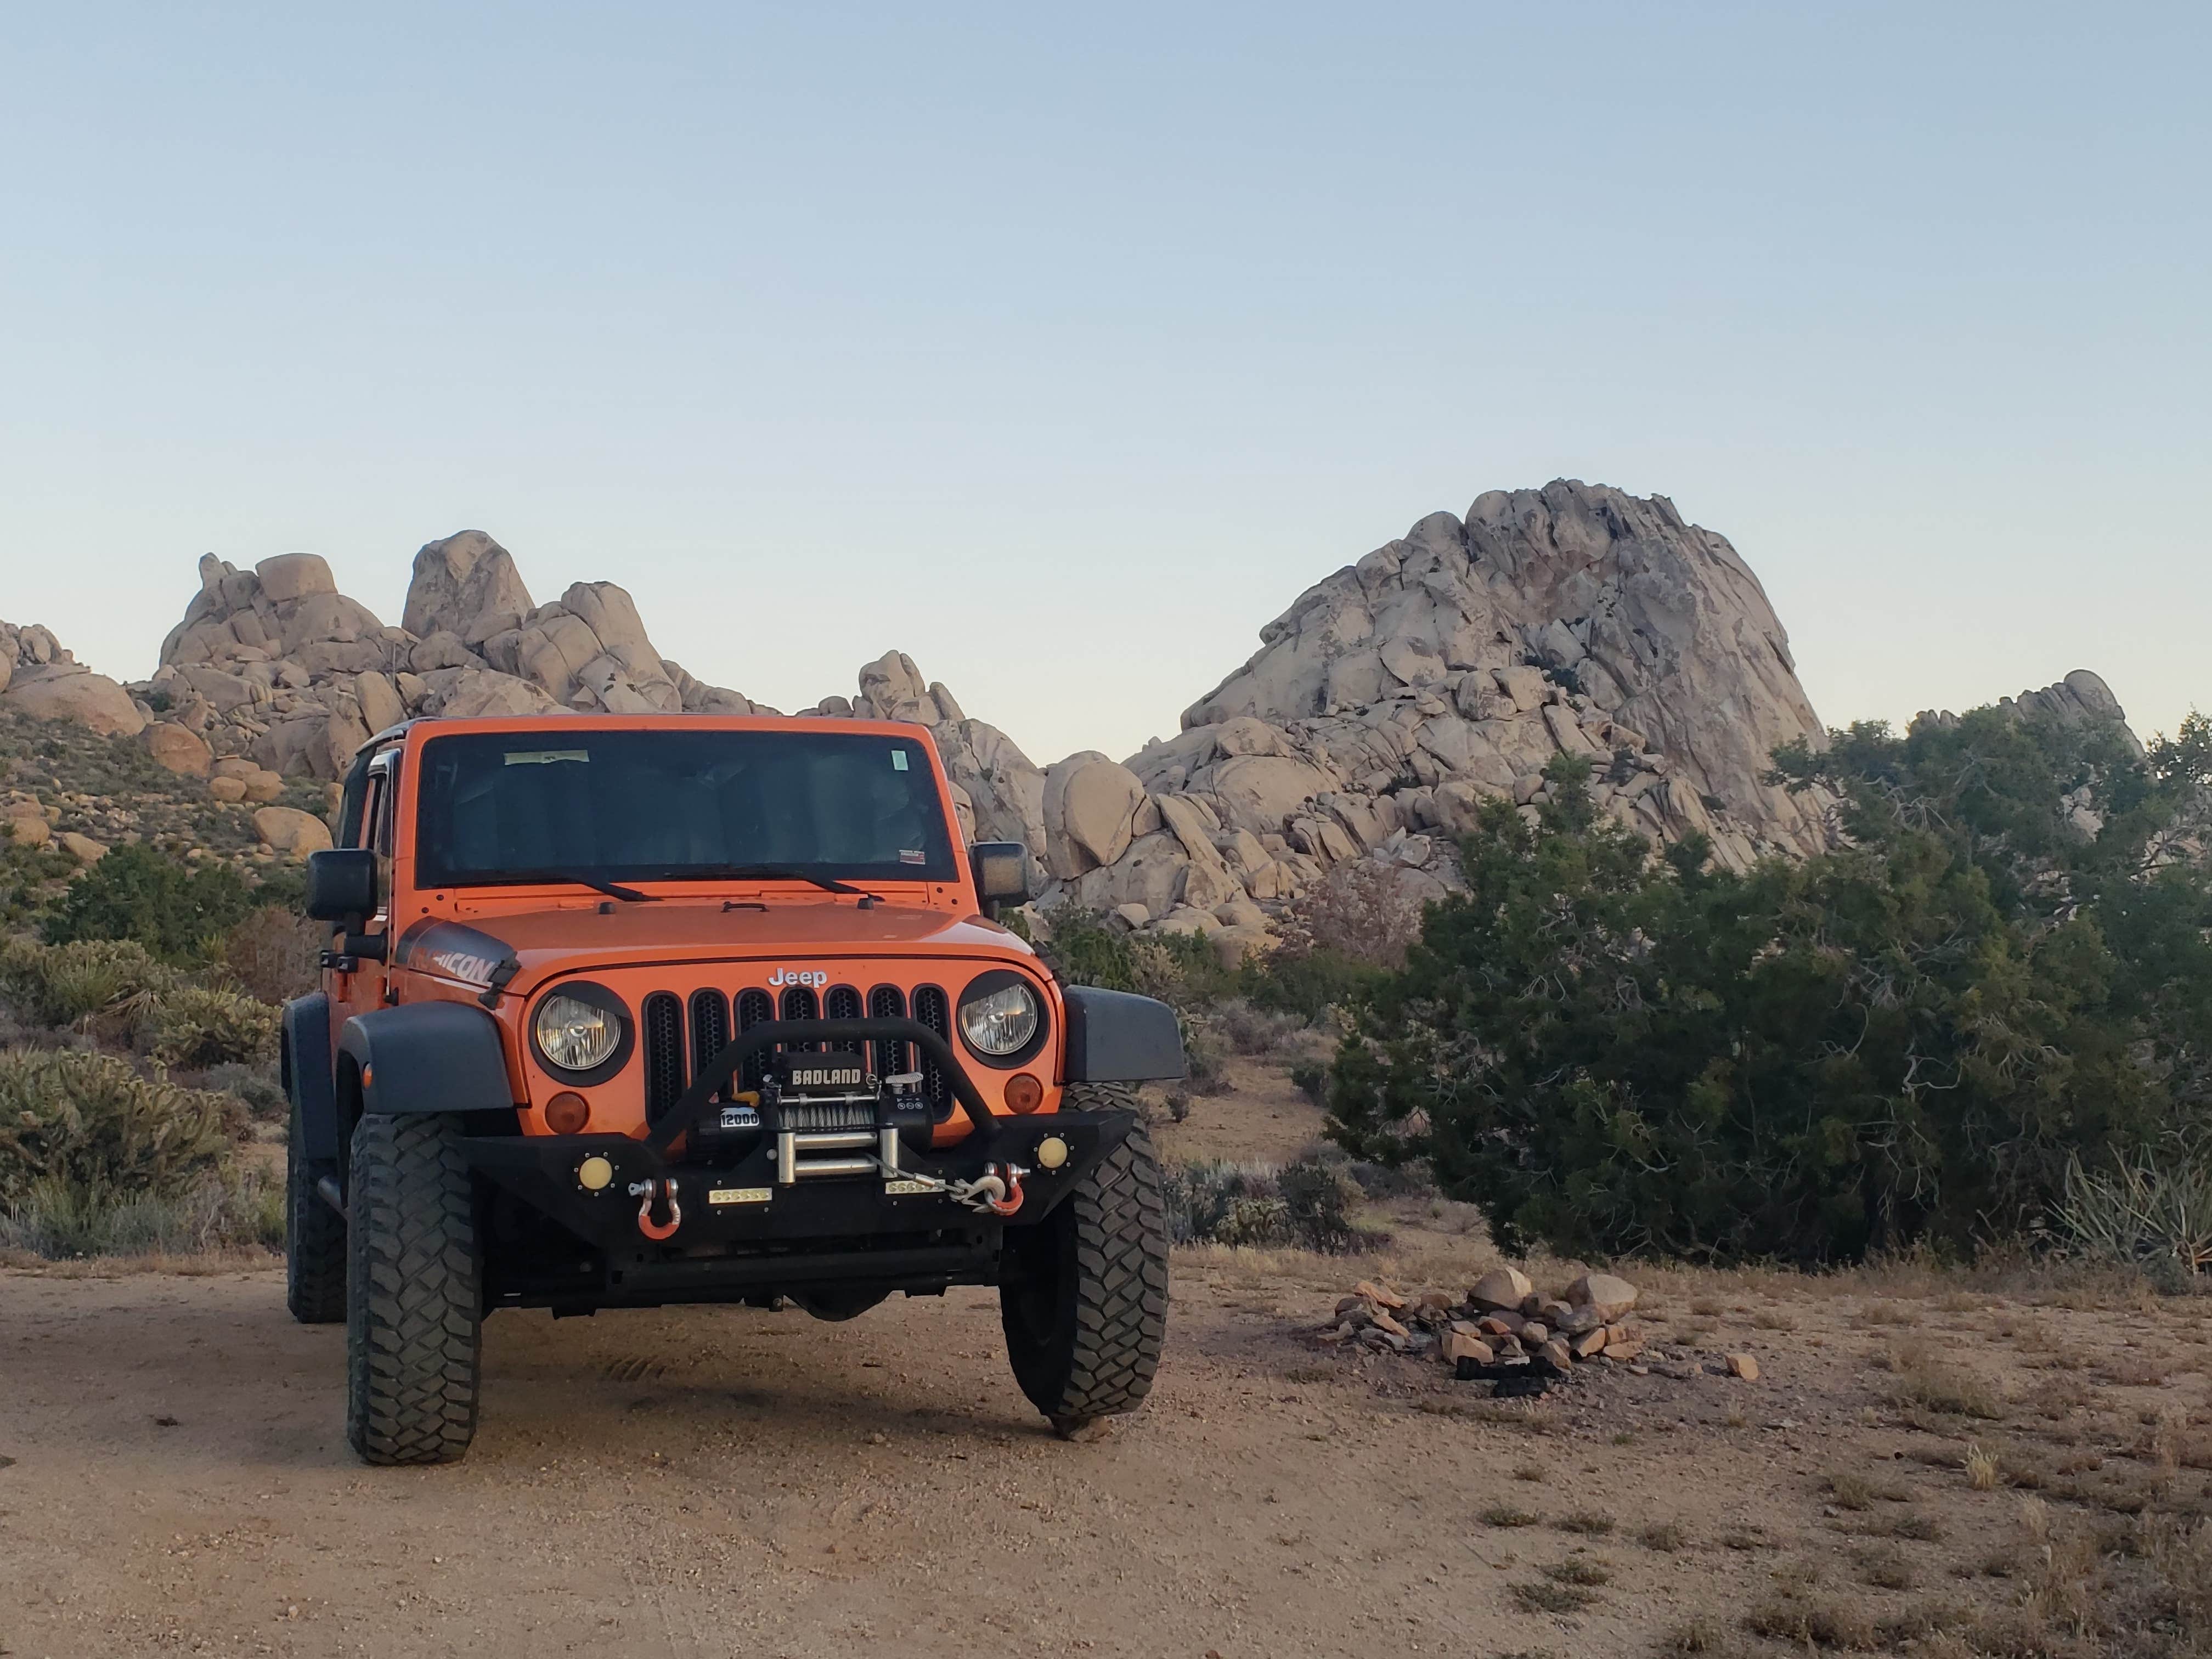 Camper submitted image from Granite Pass in Mojave National Park - 2